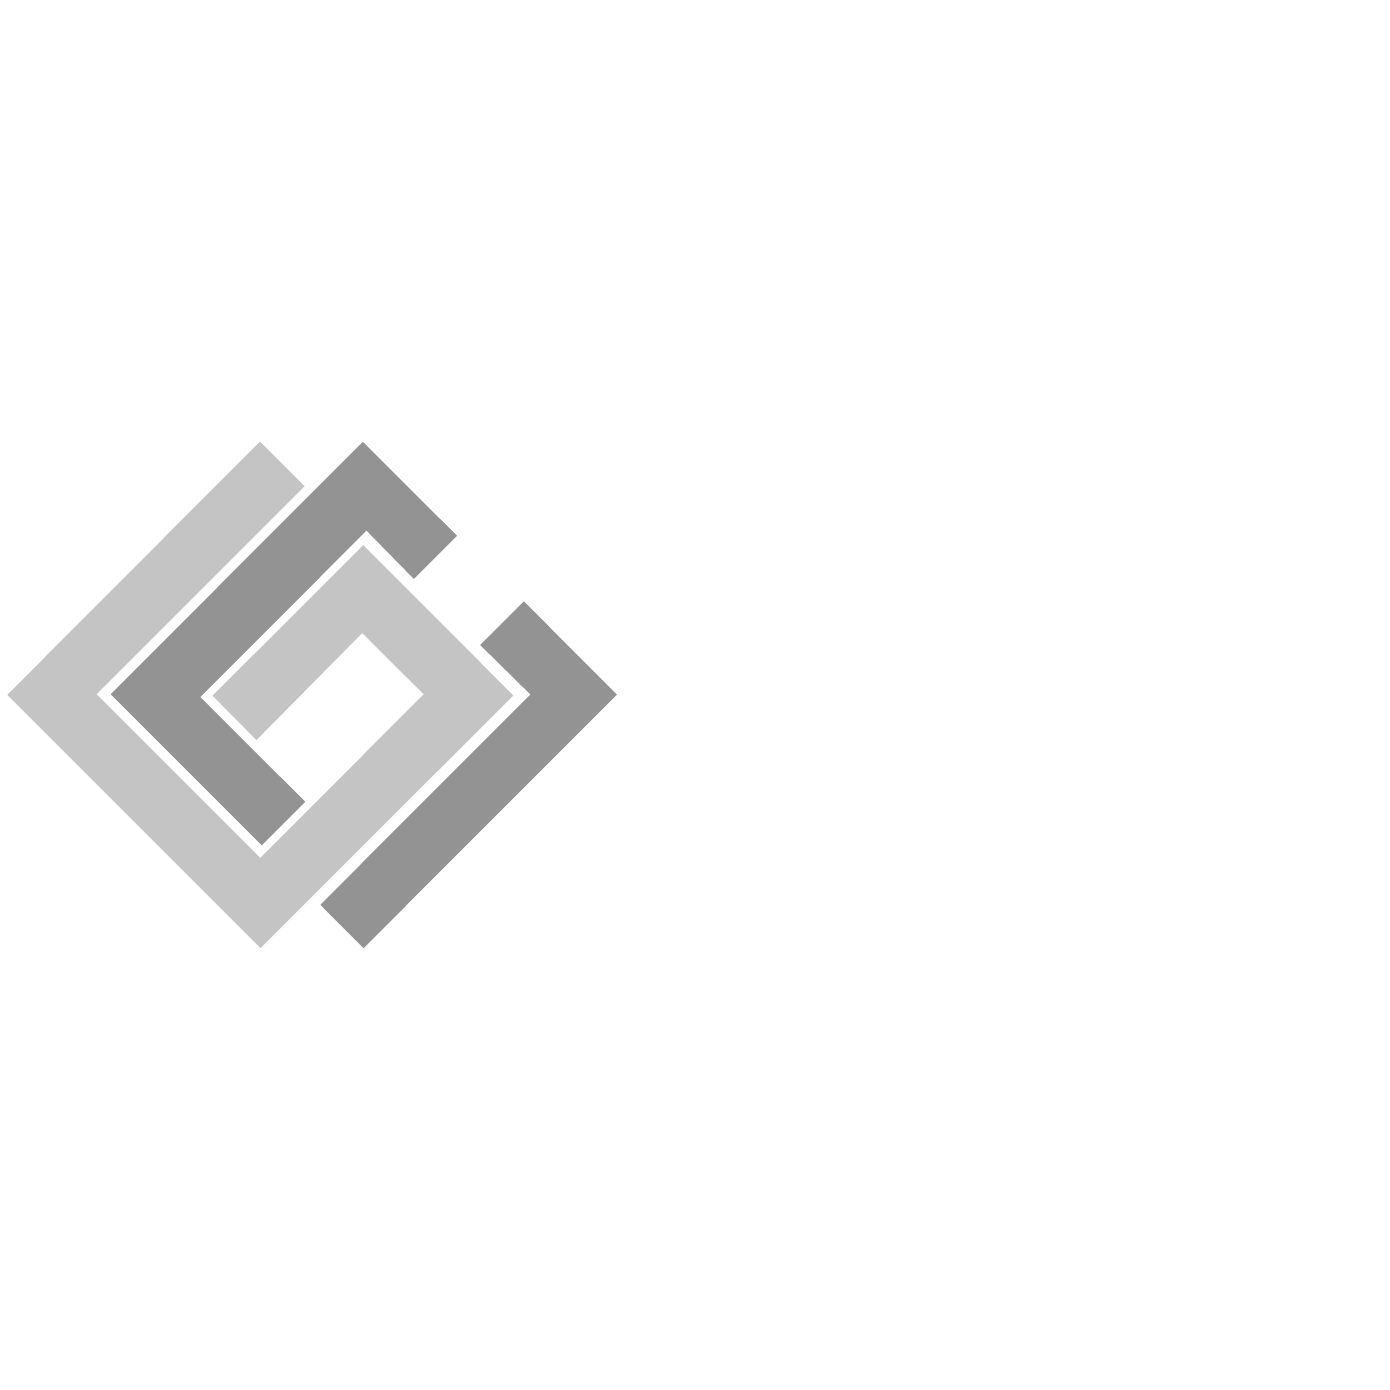 gruppo-cimbali.png